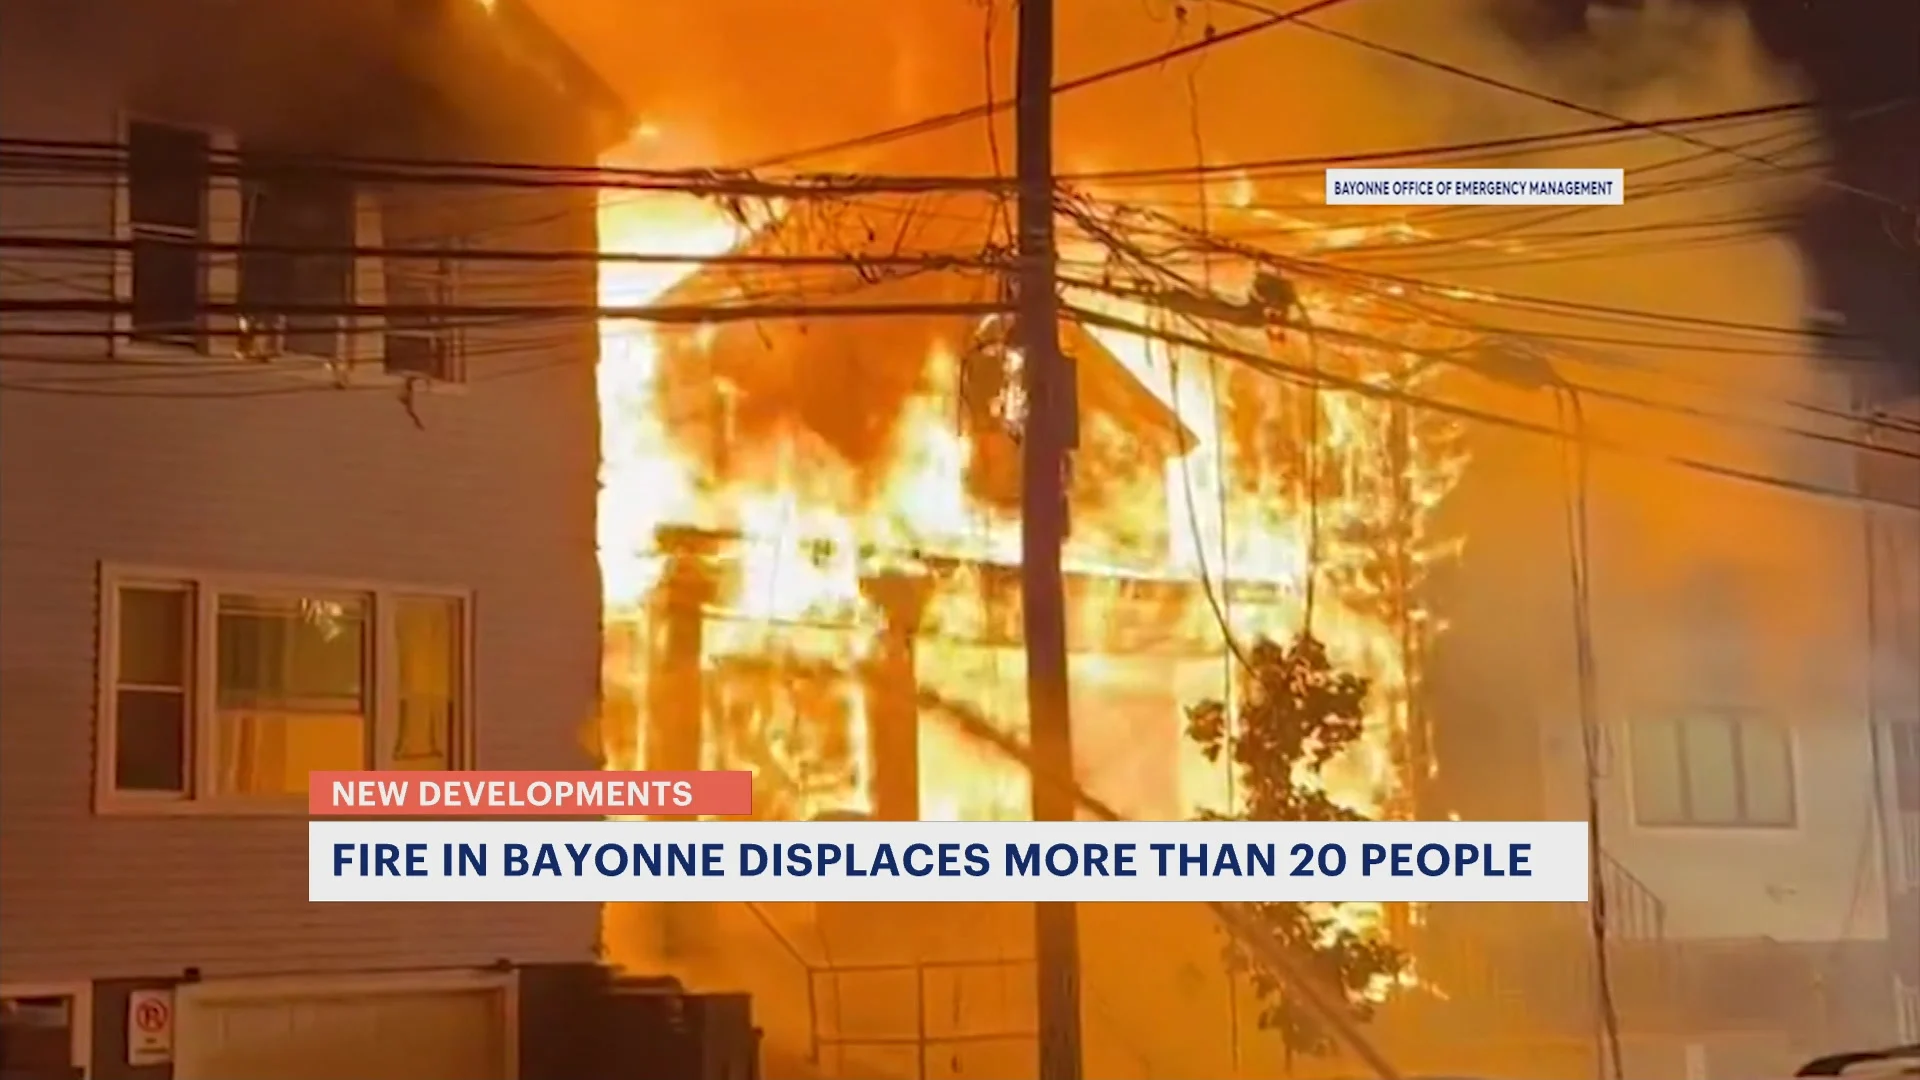 Officials: 3 homes torn down following fast-moving fire in Bayonne; 20+ displaced